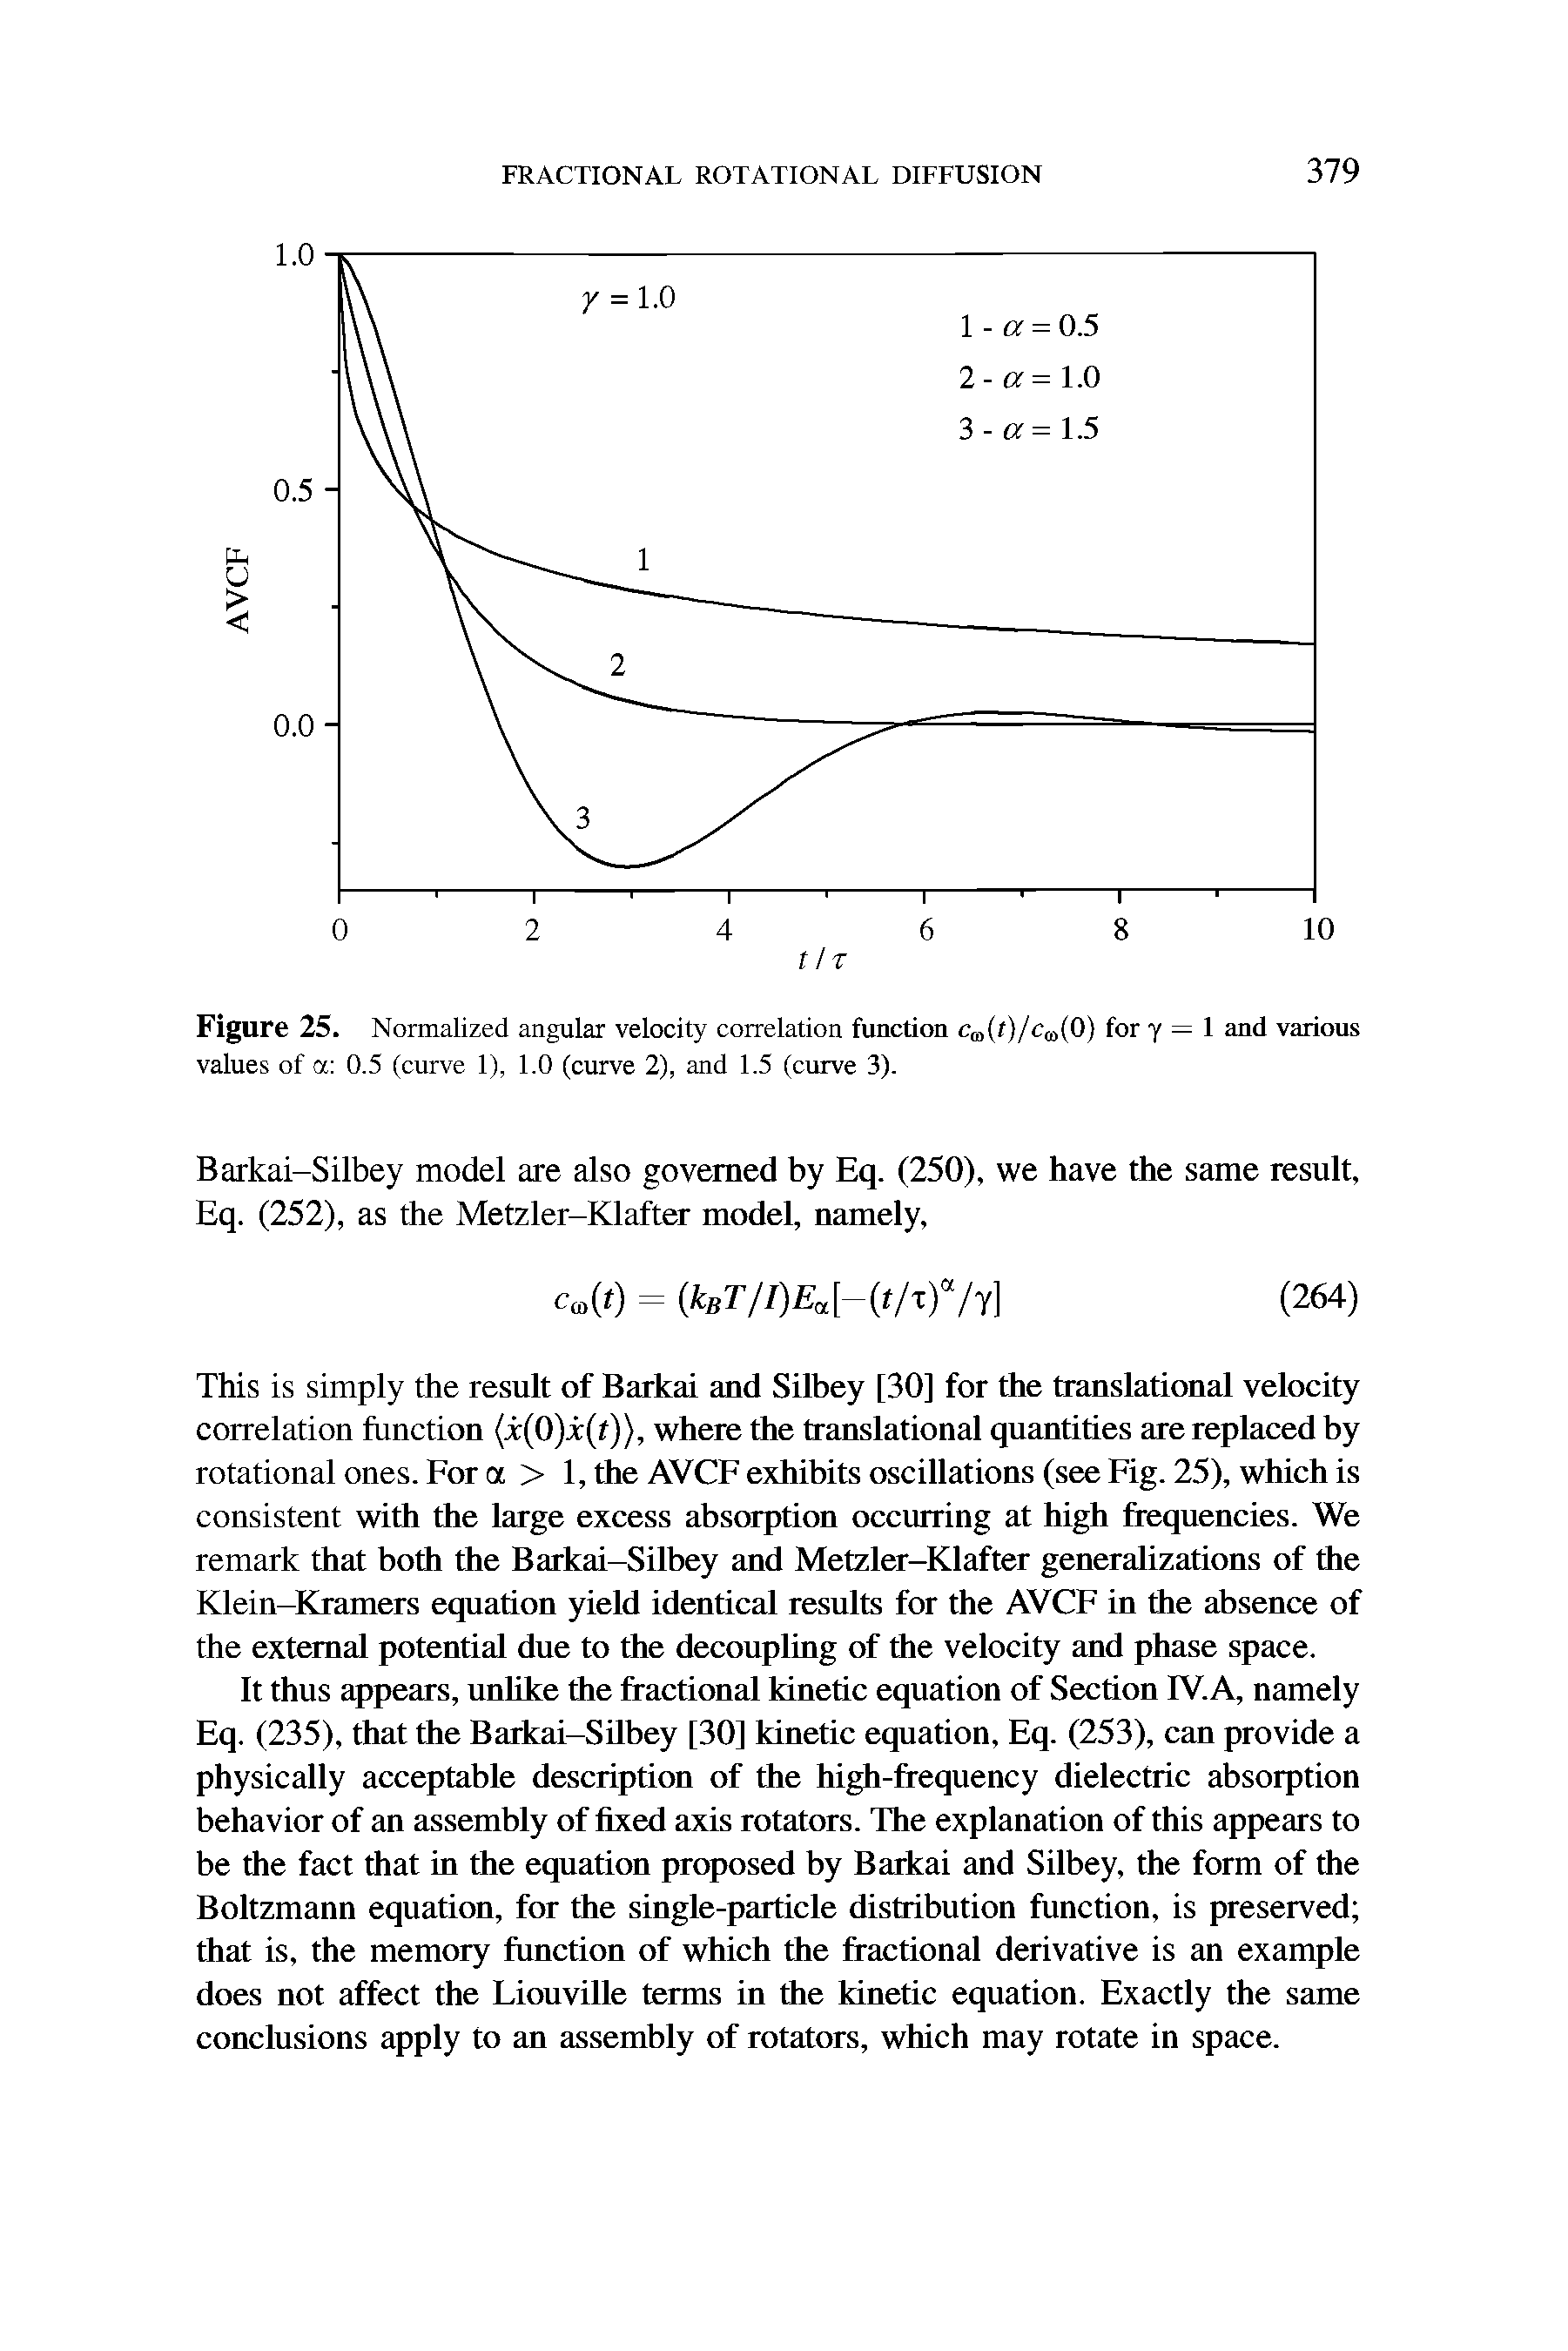 Figure 25. Normalized angular velocity correlation function cm(t)/cm(0) for y = 1 and various values of a 0.5 (curve 1), 1.0 (curve 2), and 1.5 (curve 3).